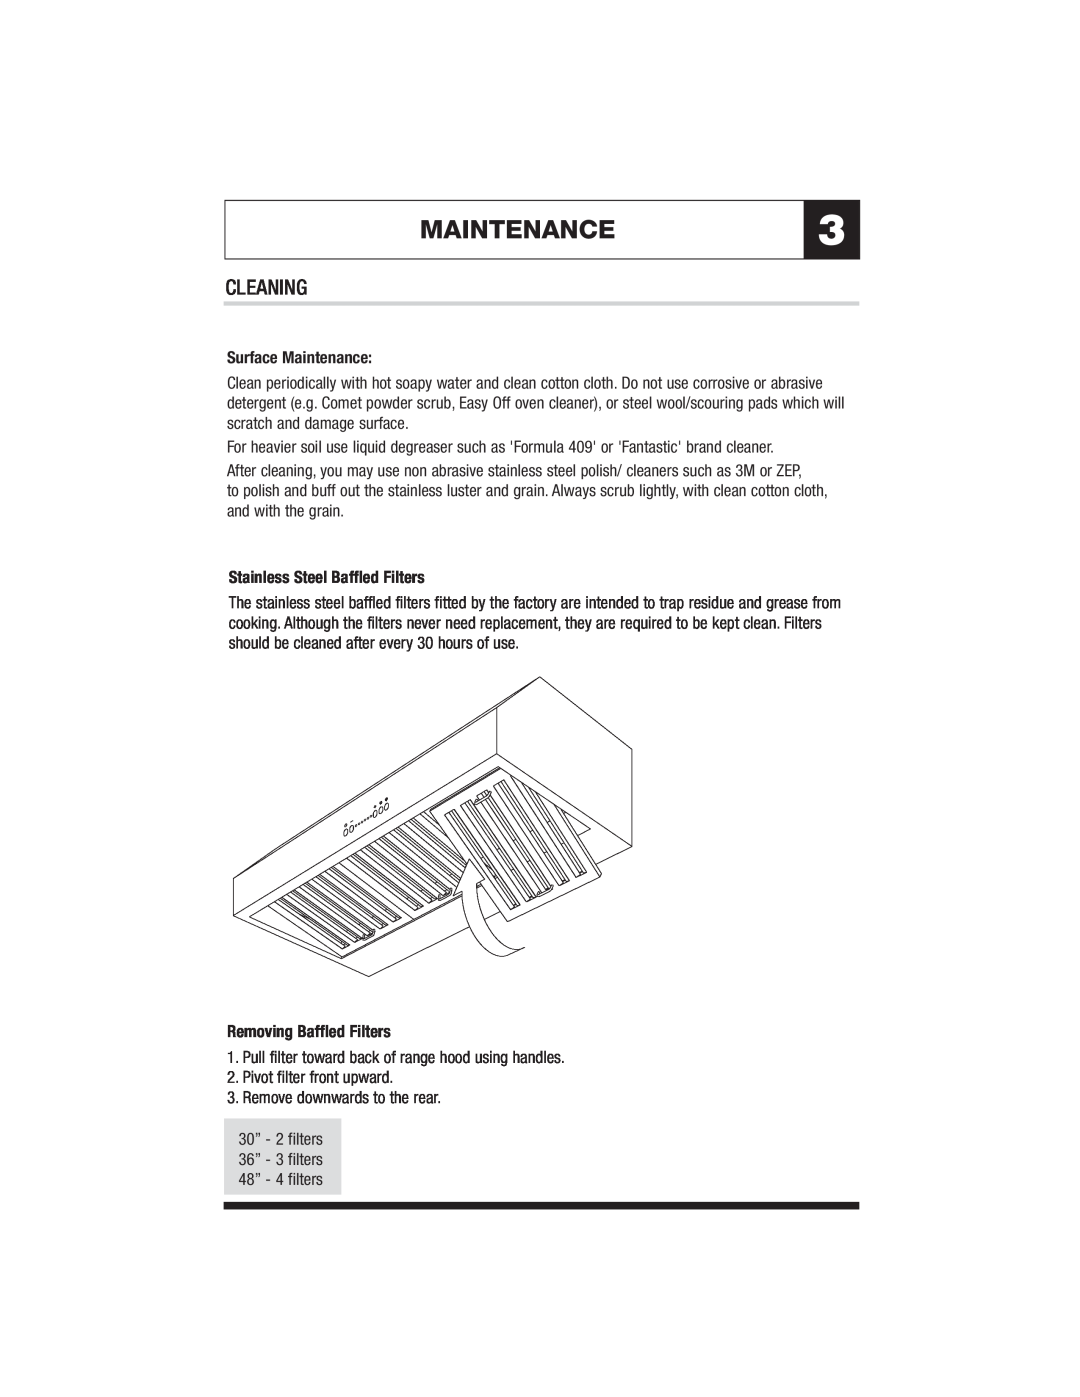 Jenn-Air MK7030 MAINTENANCE3, Cleaning, Surface Maintenance, Stainless Steel Baffled Filters, Removing Baffled Filters 